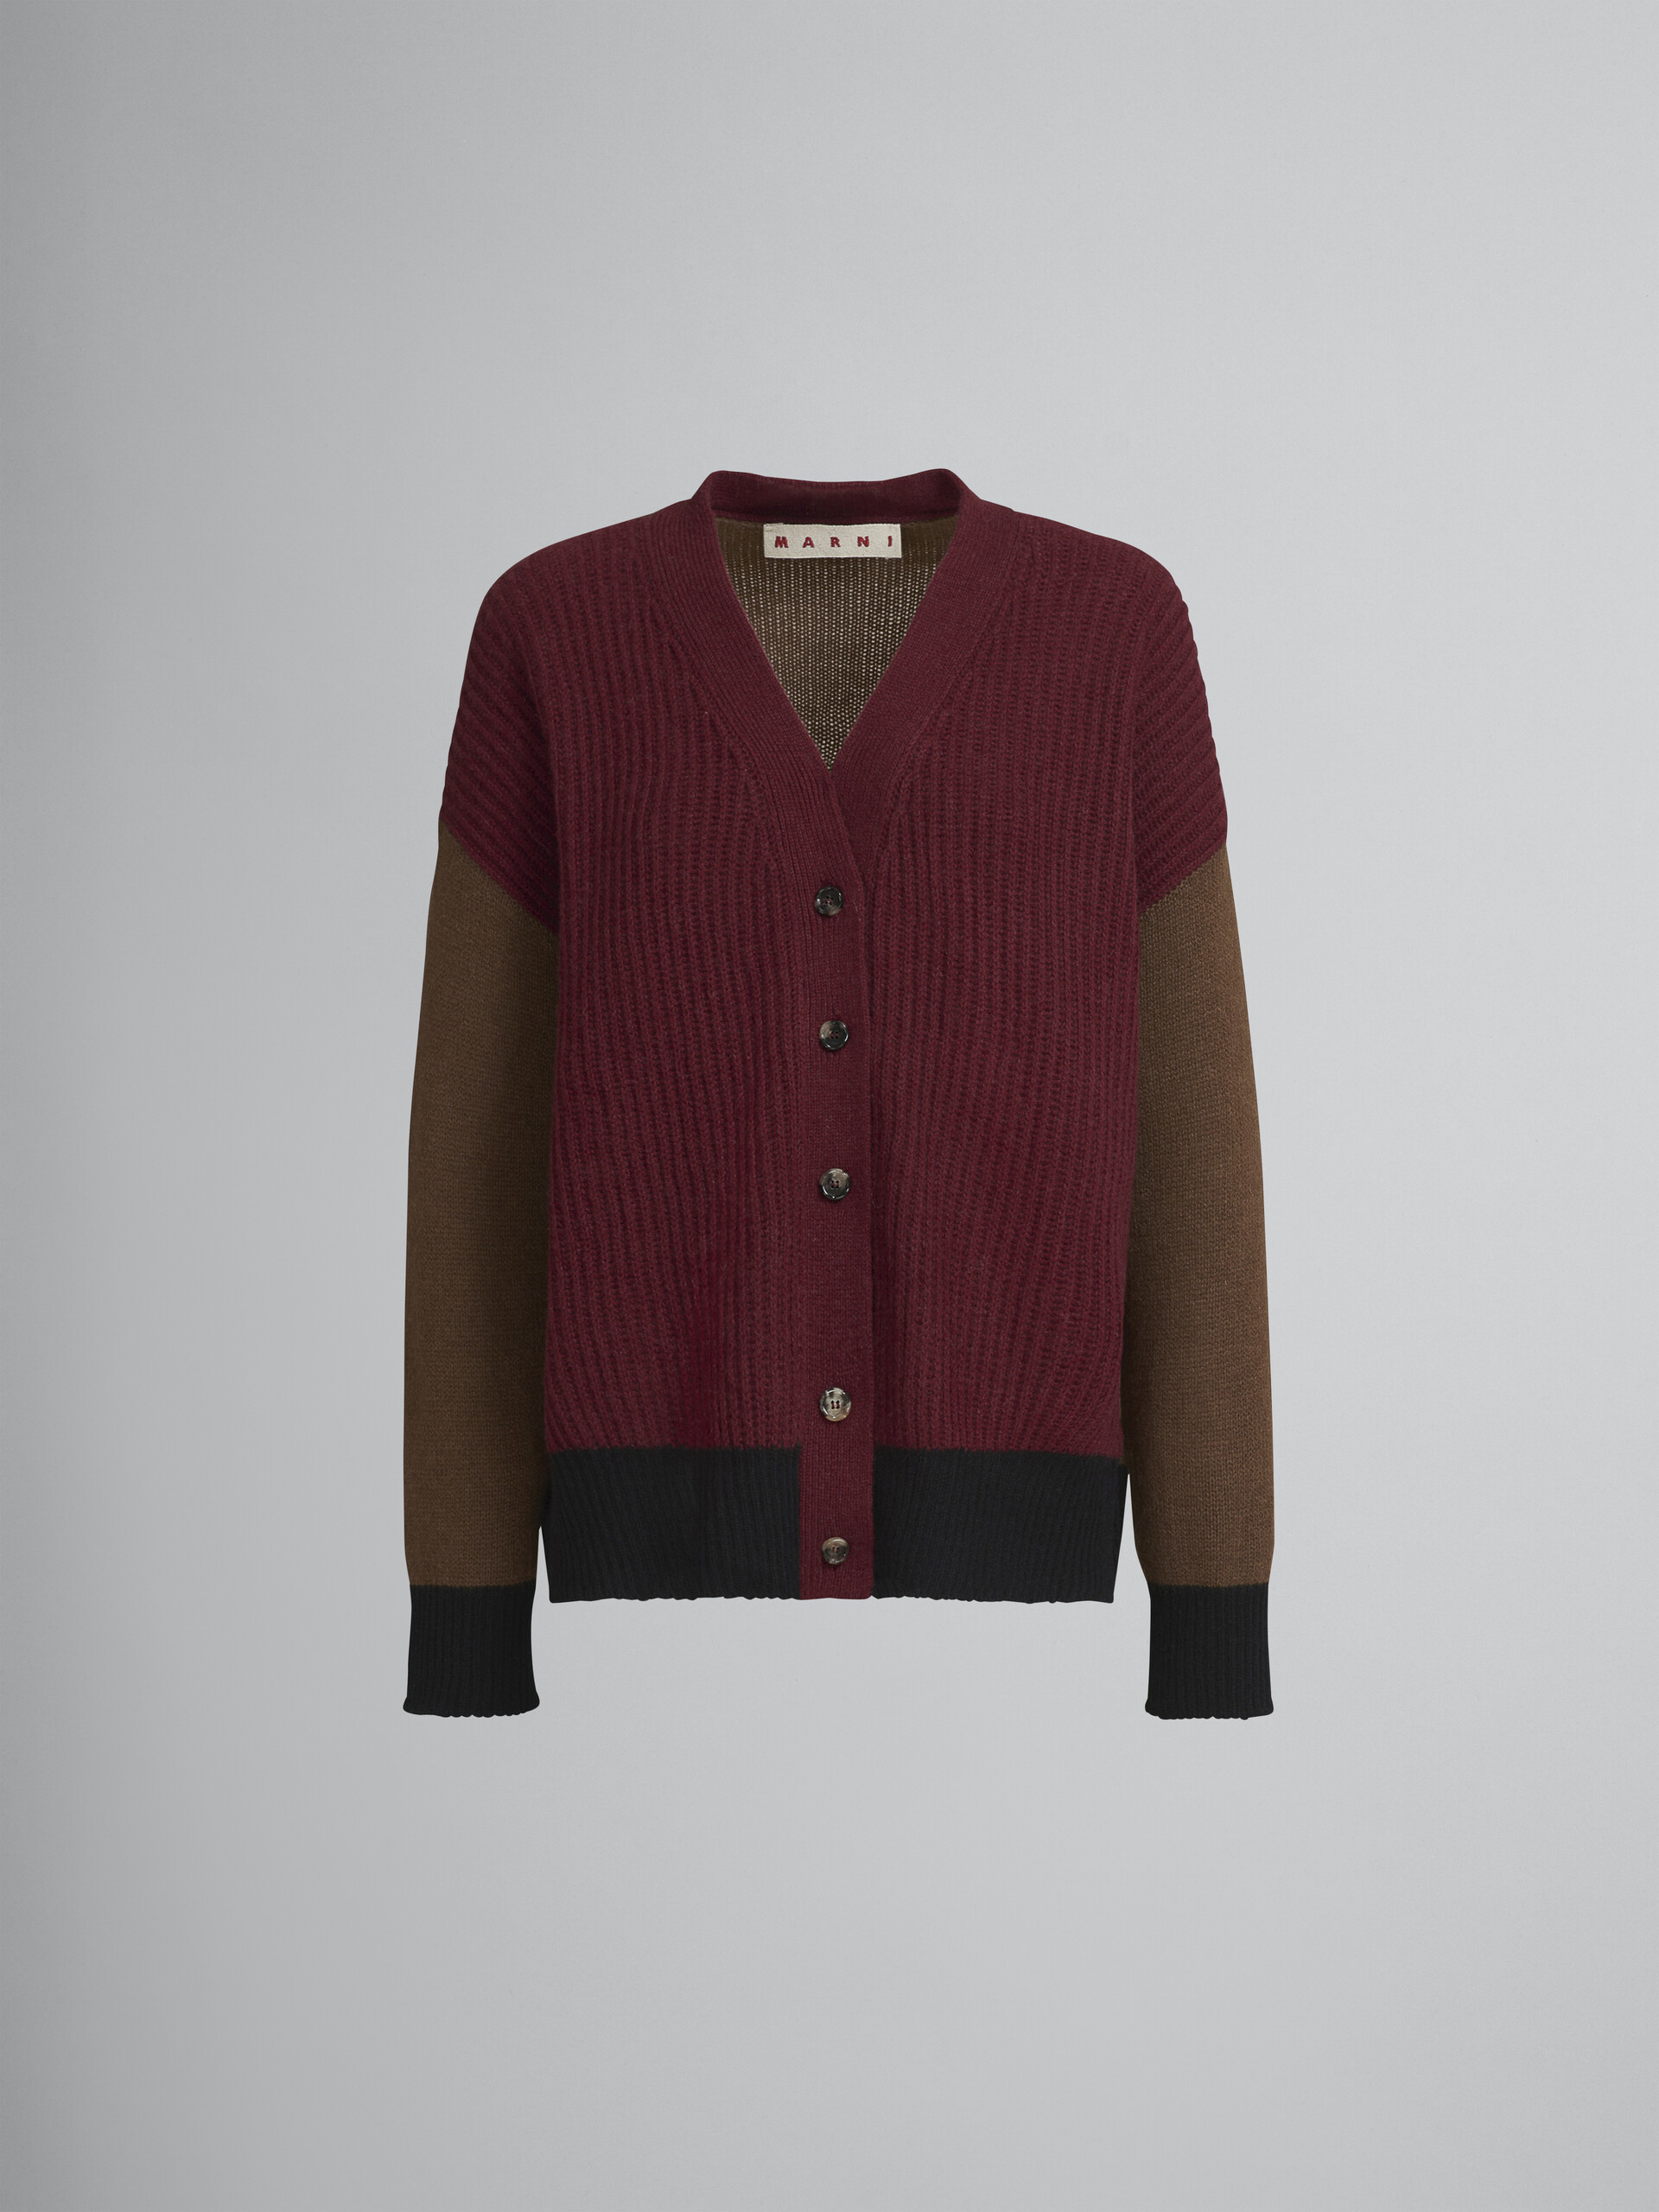 Red cashmere V-neck cardigan - Pullovers - Image 1